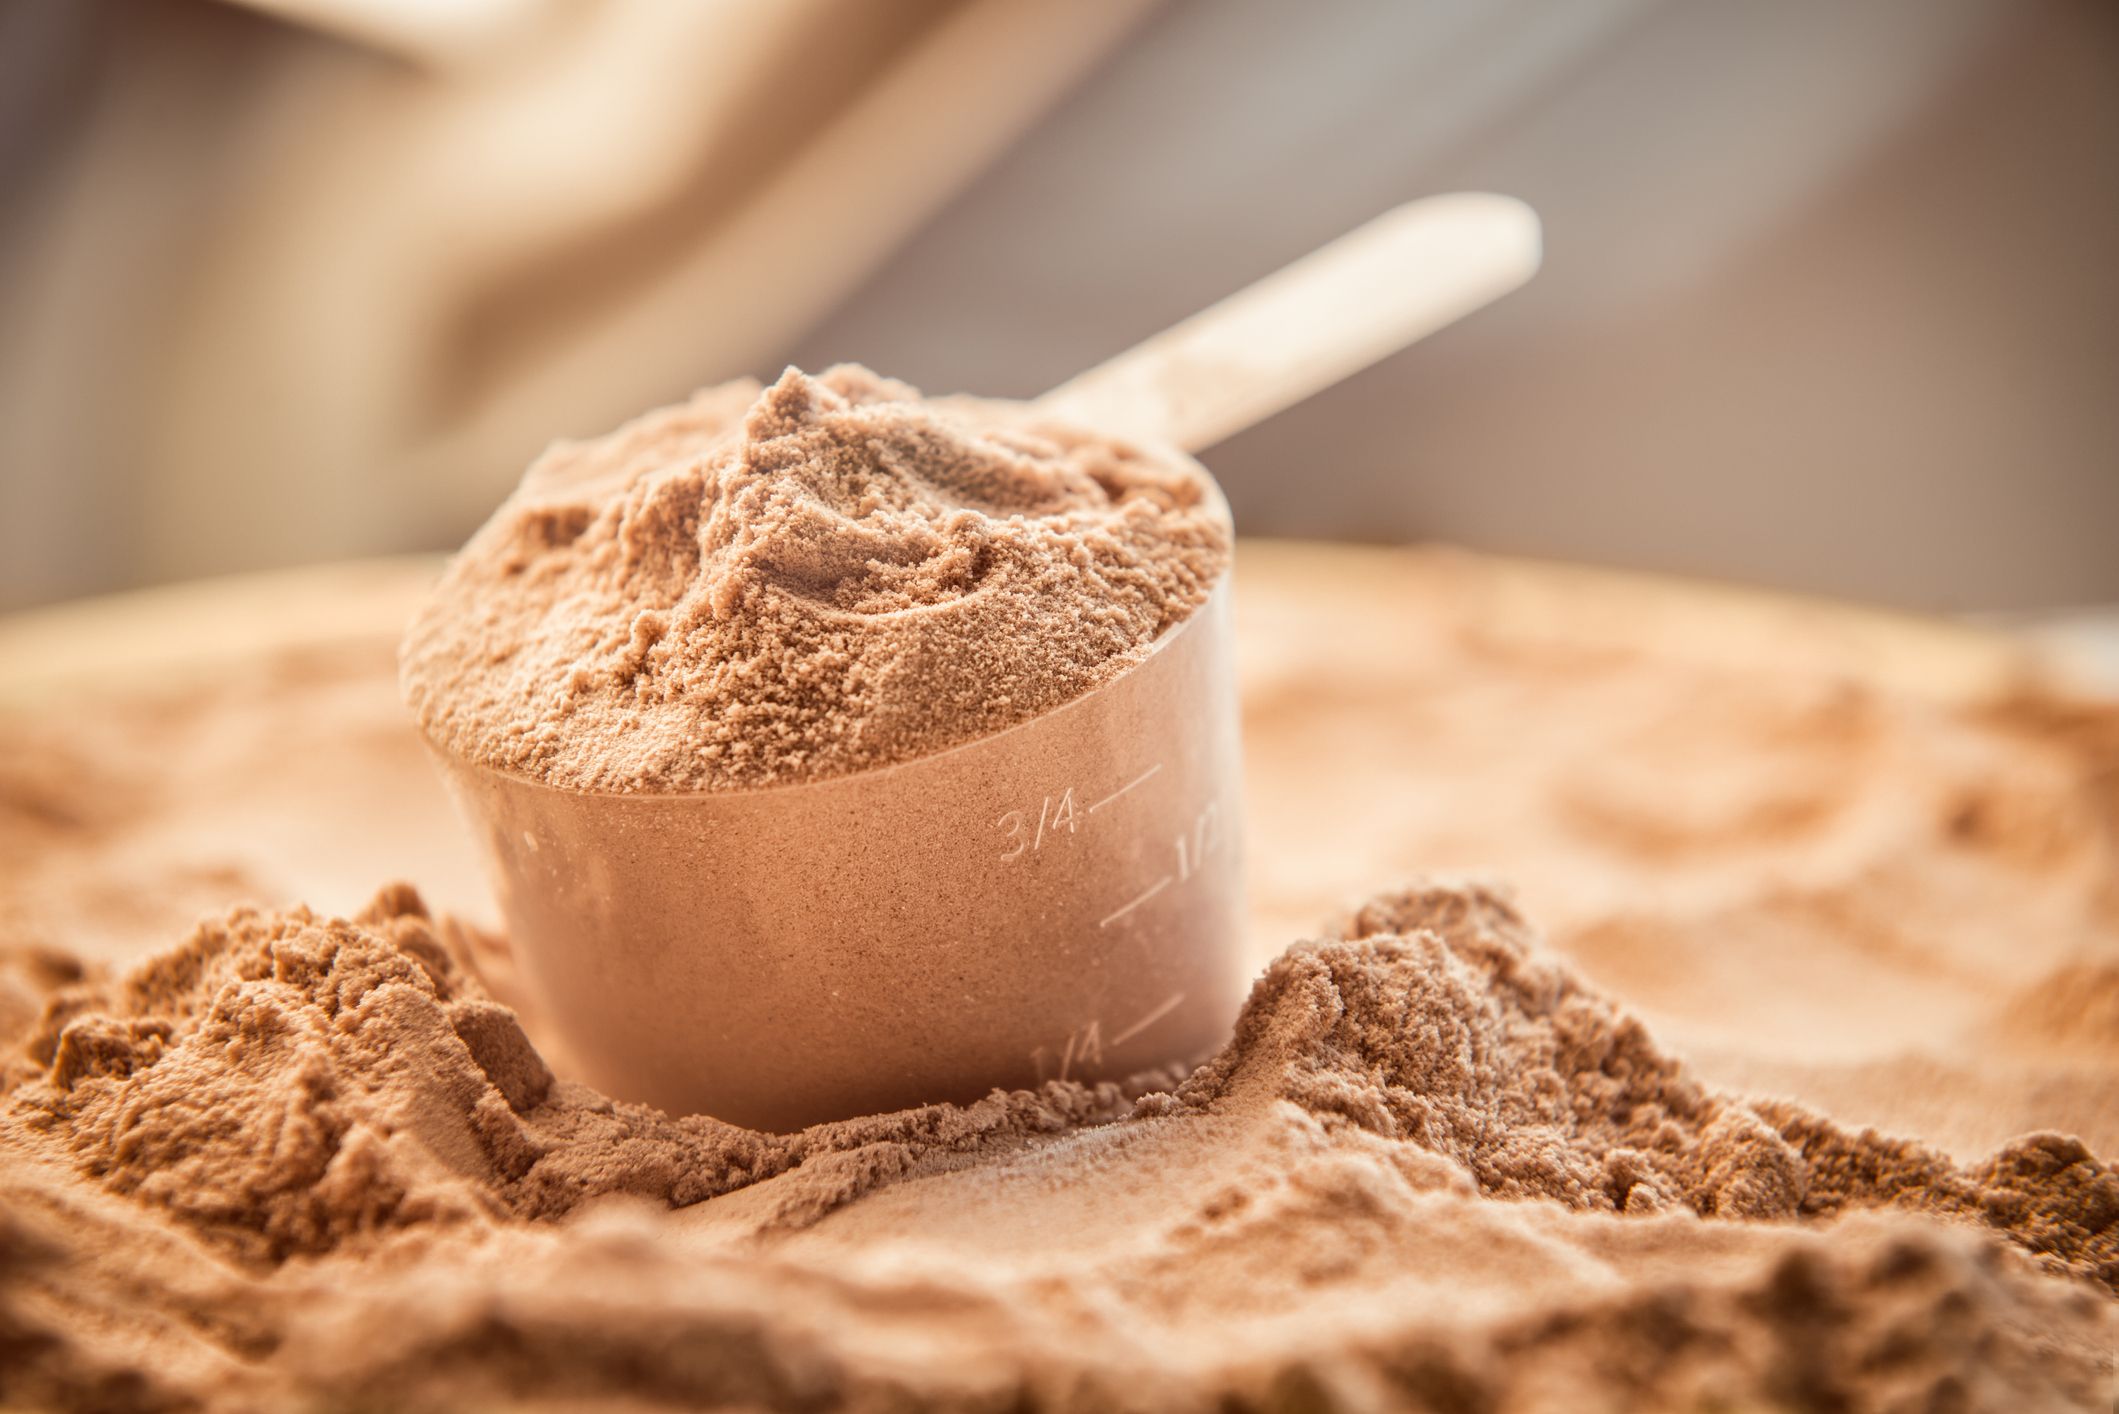 10 Best Protein Powders for Weight Loss